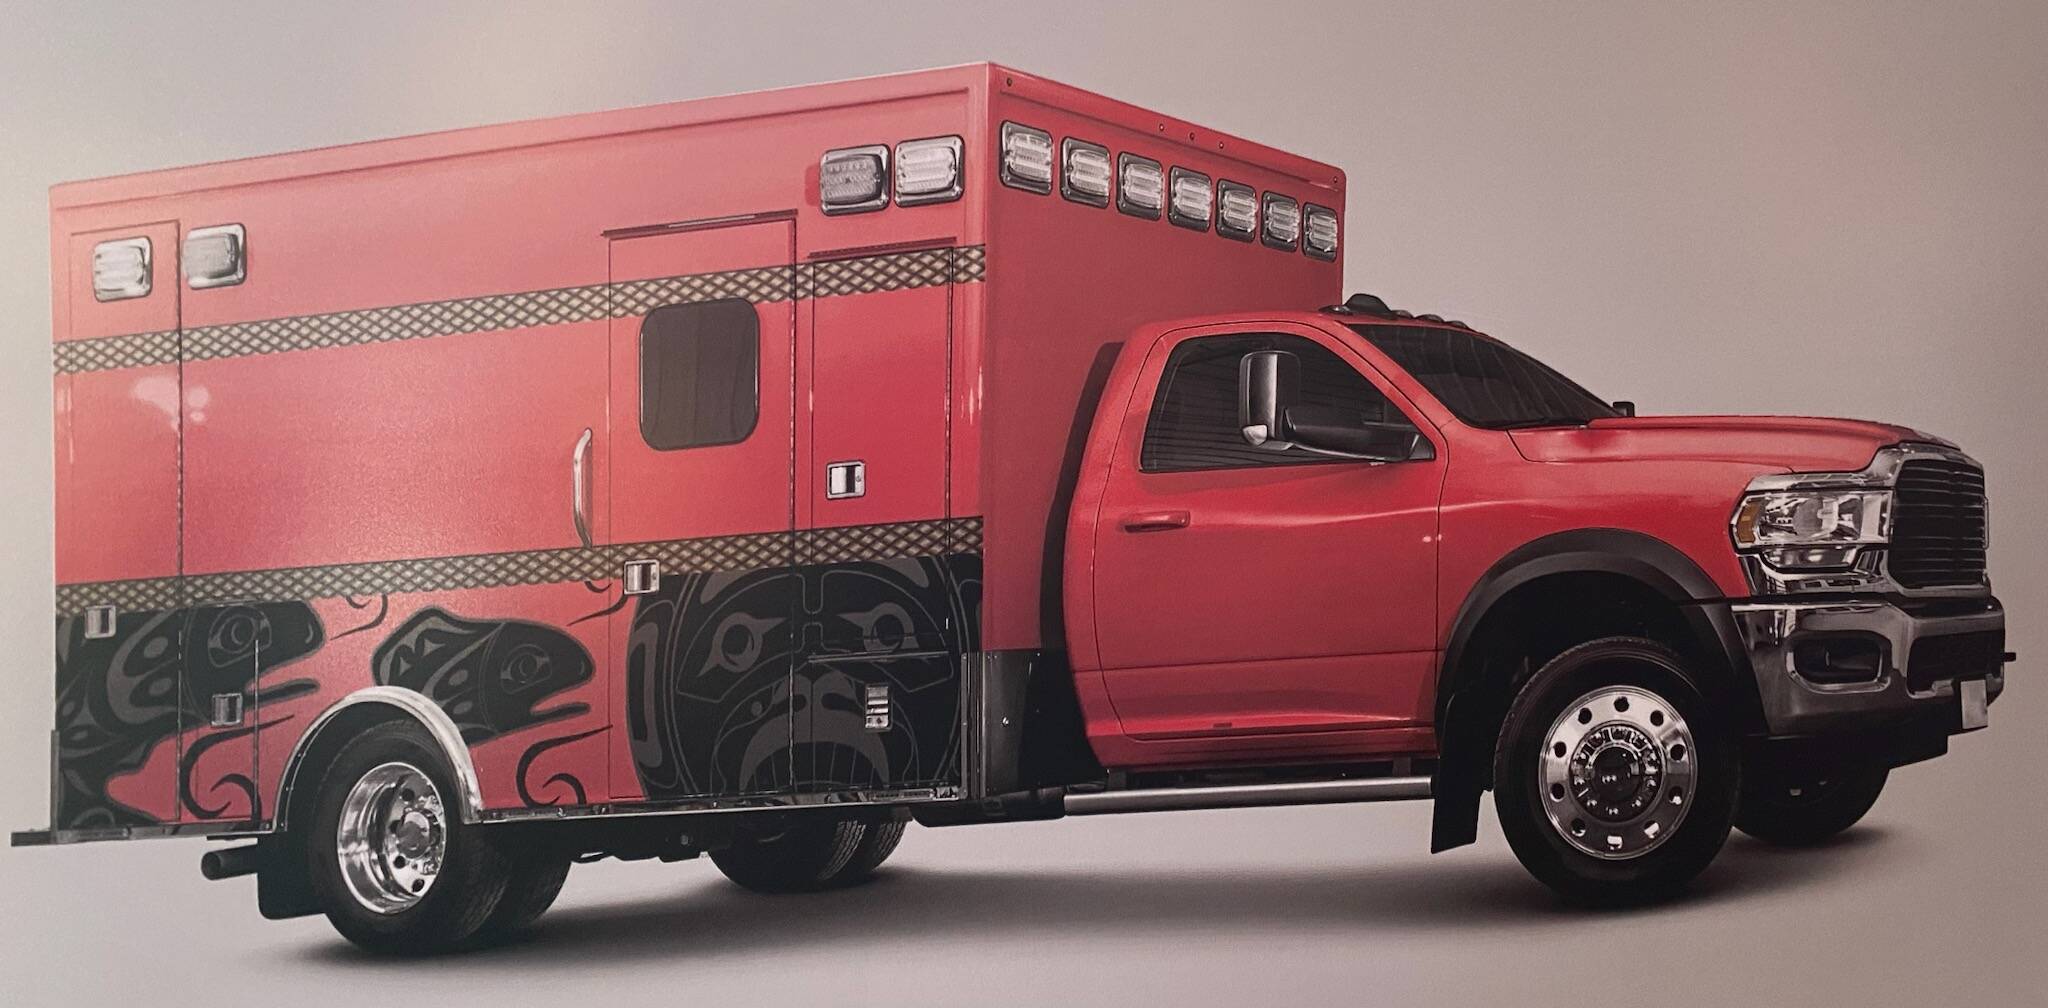 Exterior design of the new ambulance.